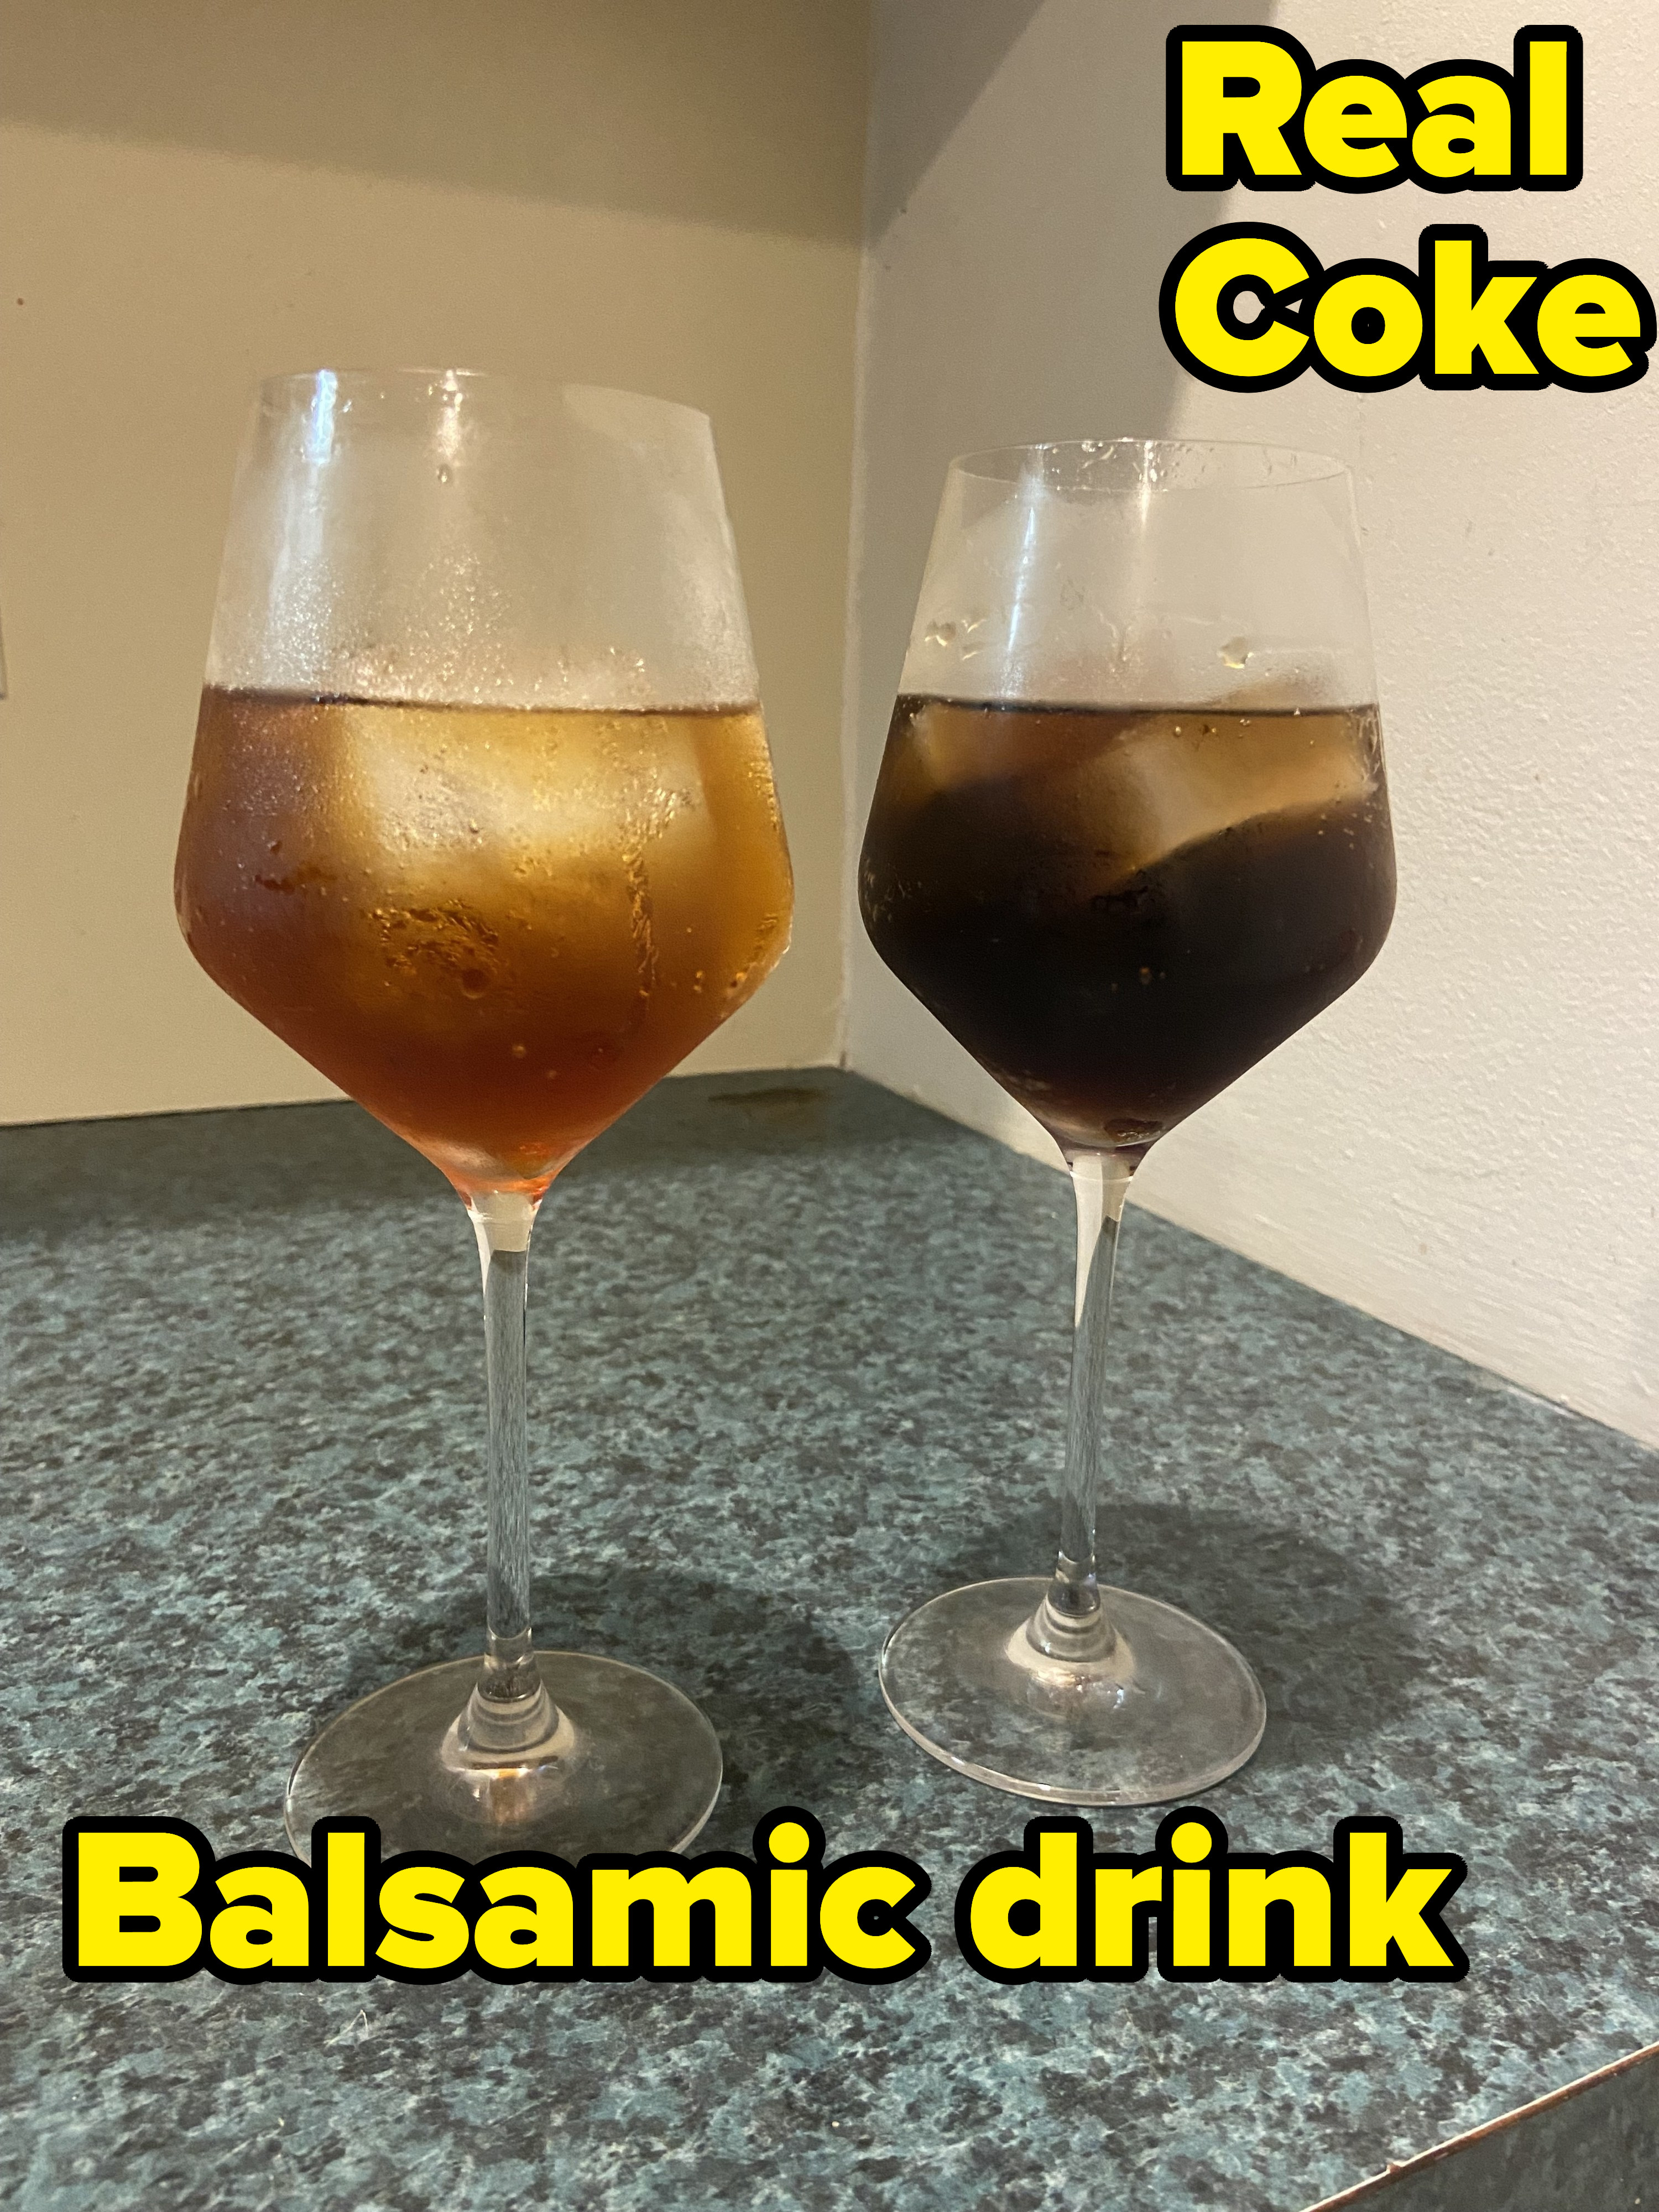 The two glasses side by side